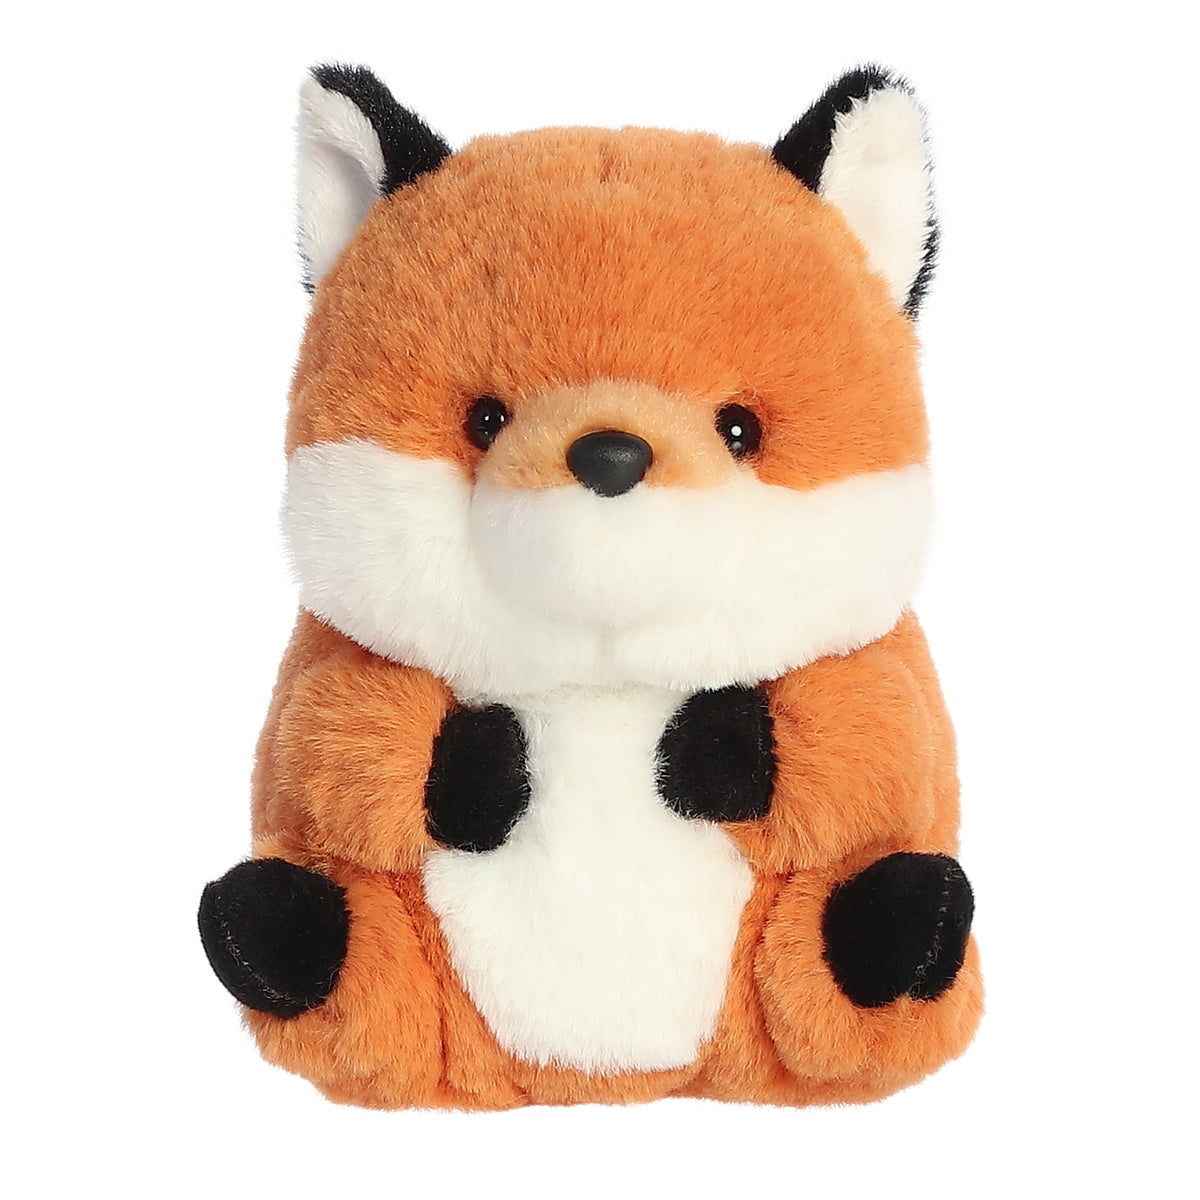 Fox plushie with a vibrant pumpkin-orange coat, charming black paws, and a playful pose, pointing its short legs skyward.